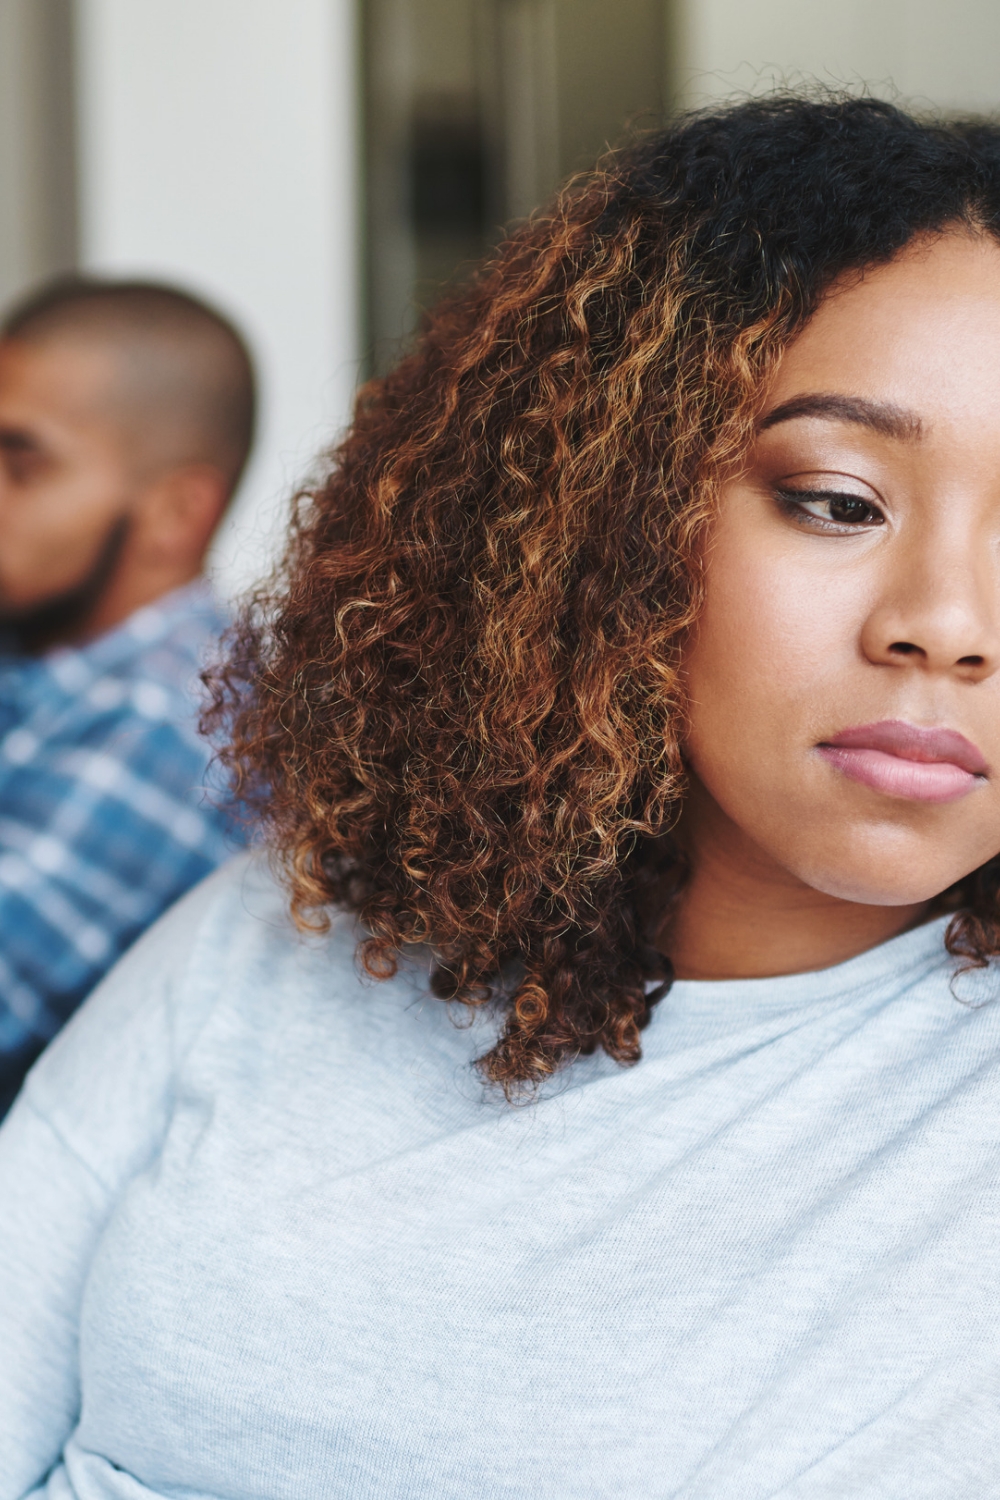 6 Eye-opening Reasons Why Husbands Treat Their Wives Badly